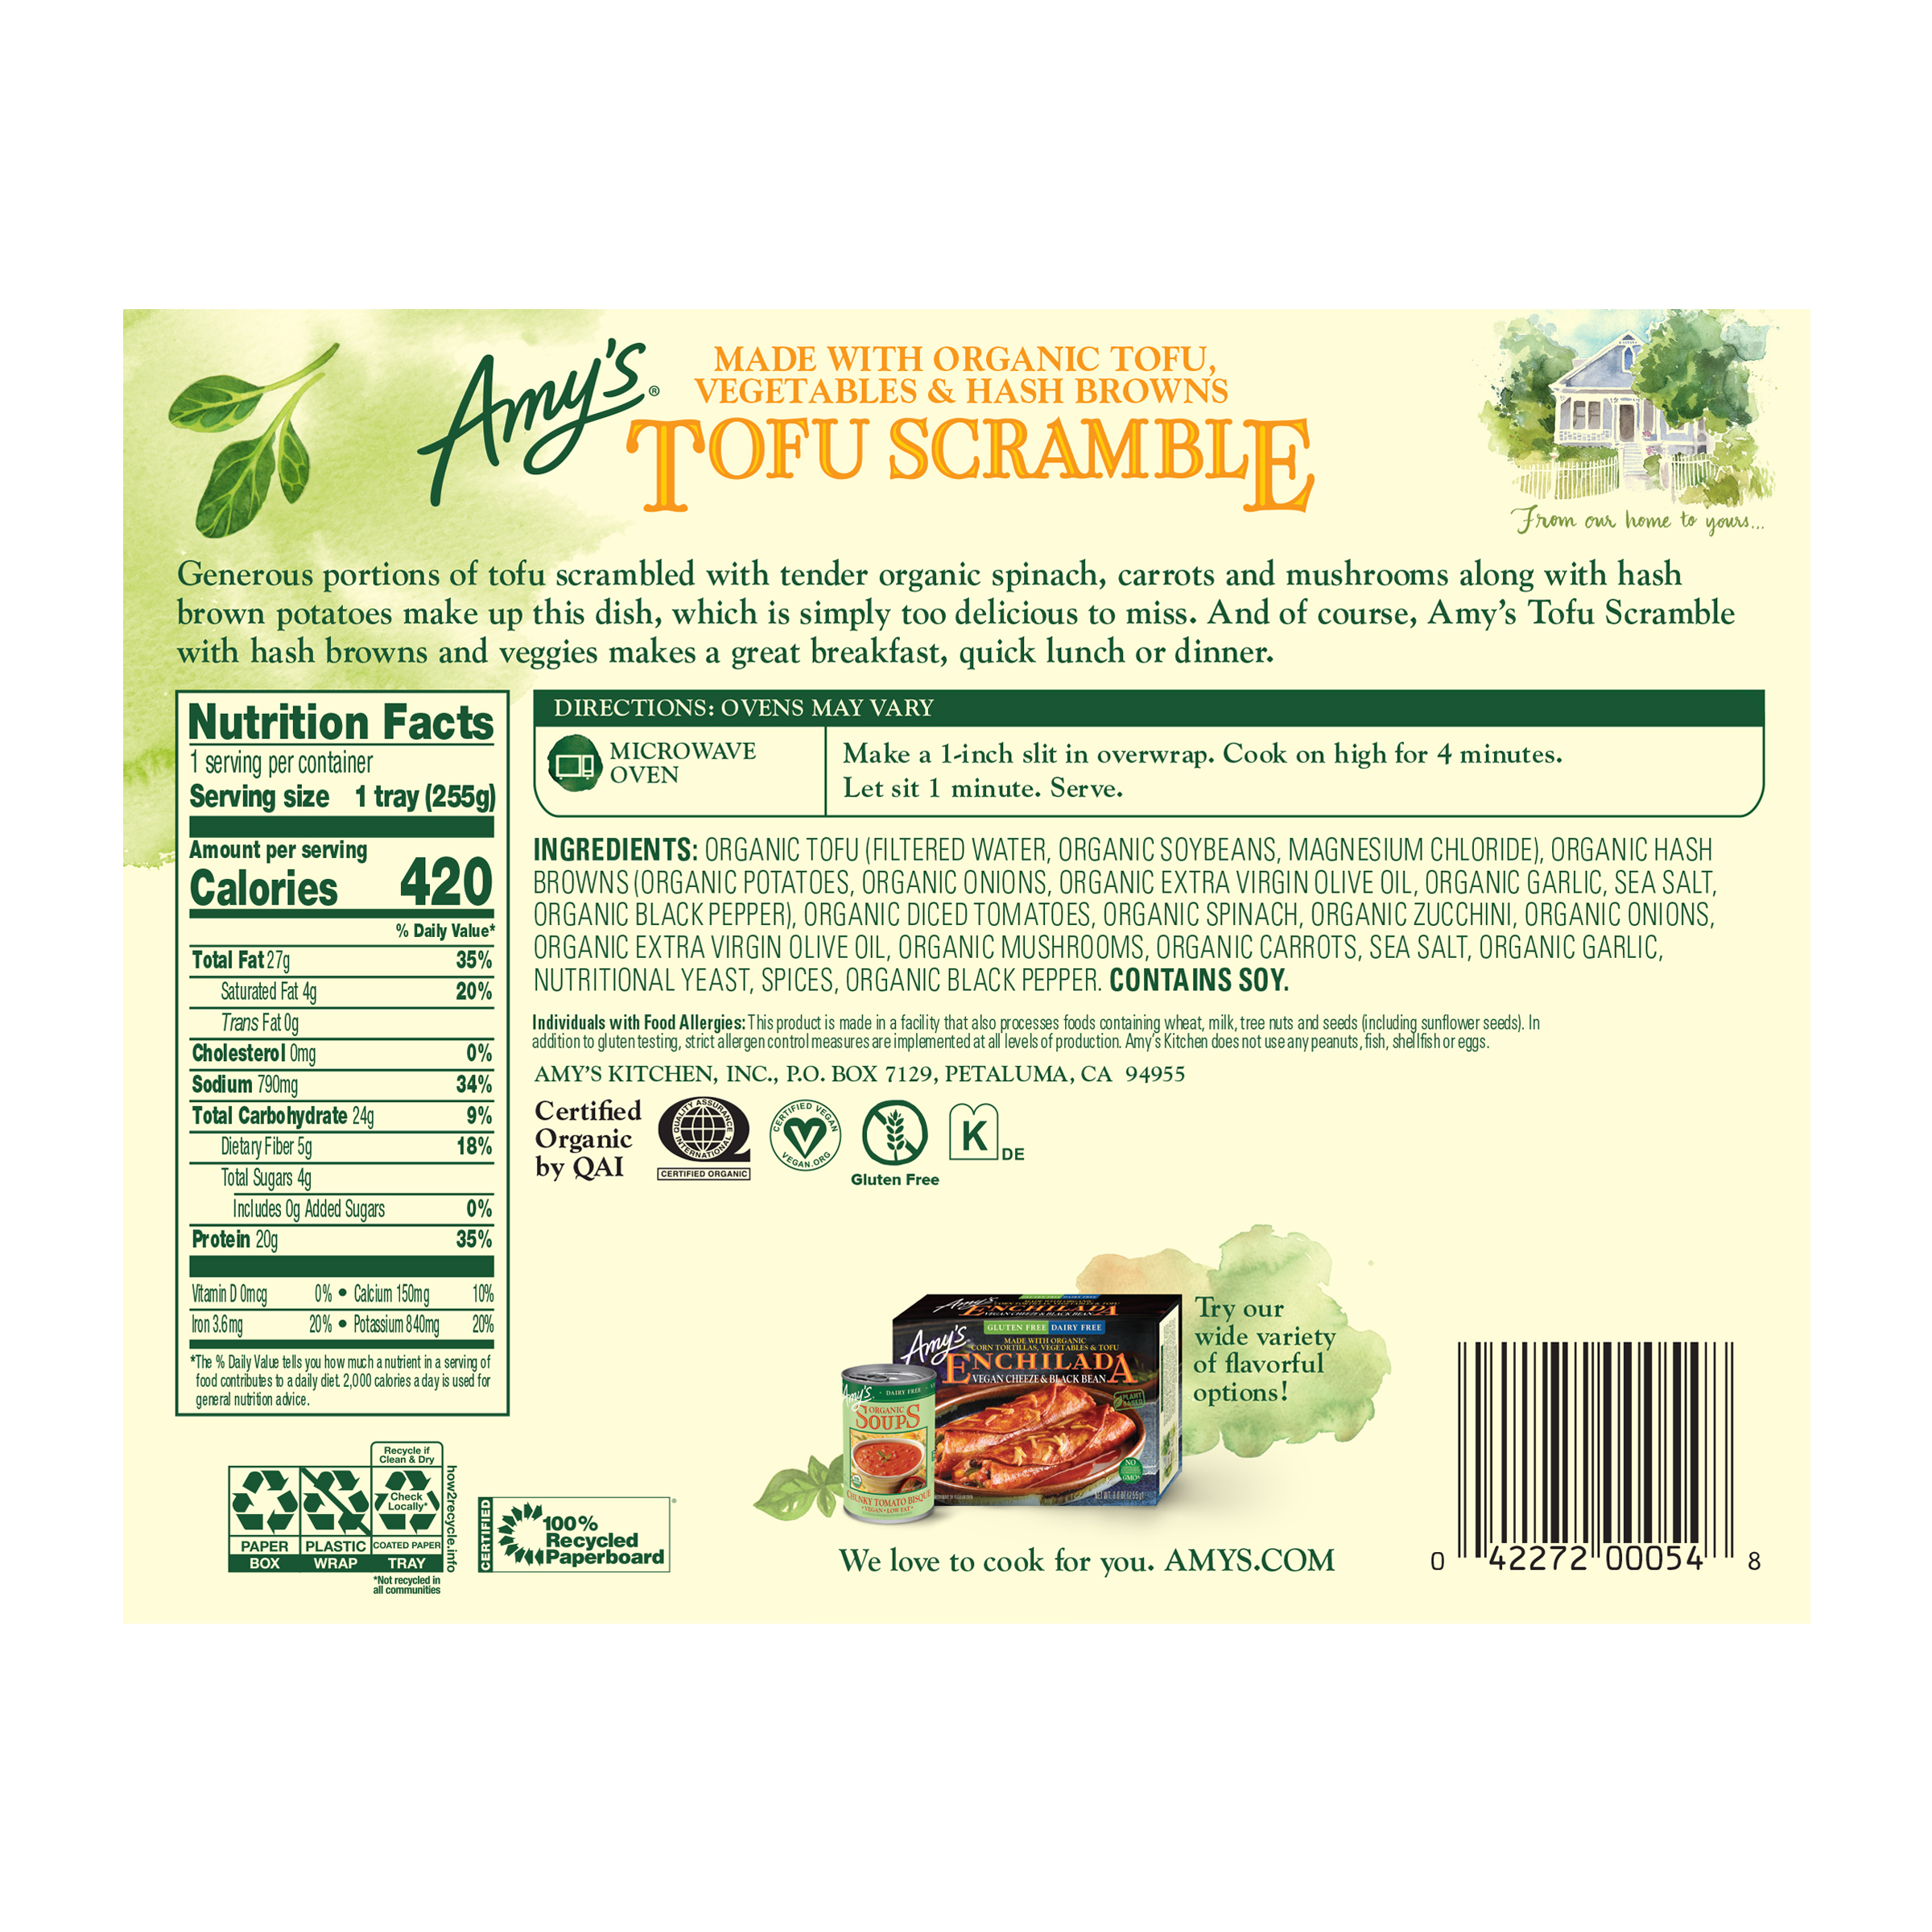 Amy’s Kitchen Frozen Meals, Tofu Scramble, Plant-Based Microwave Meal, 9 oz - image 3 of 7